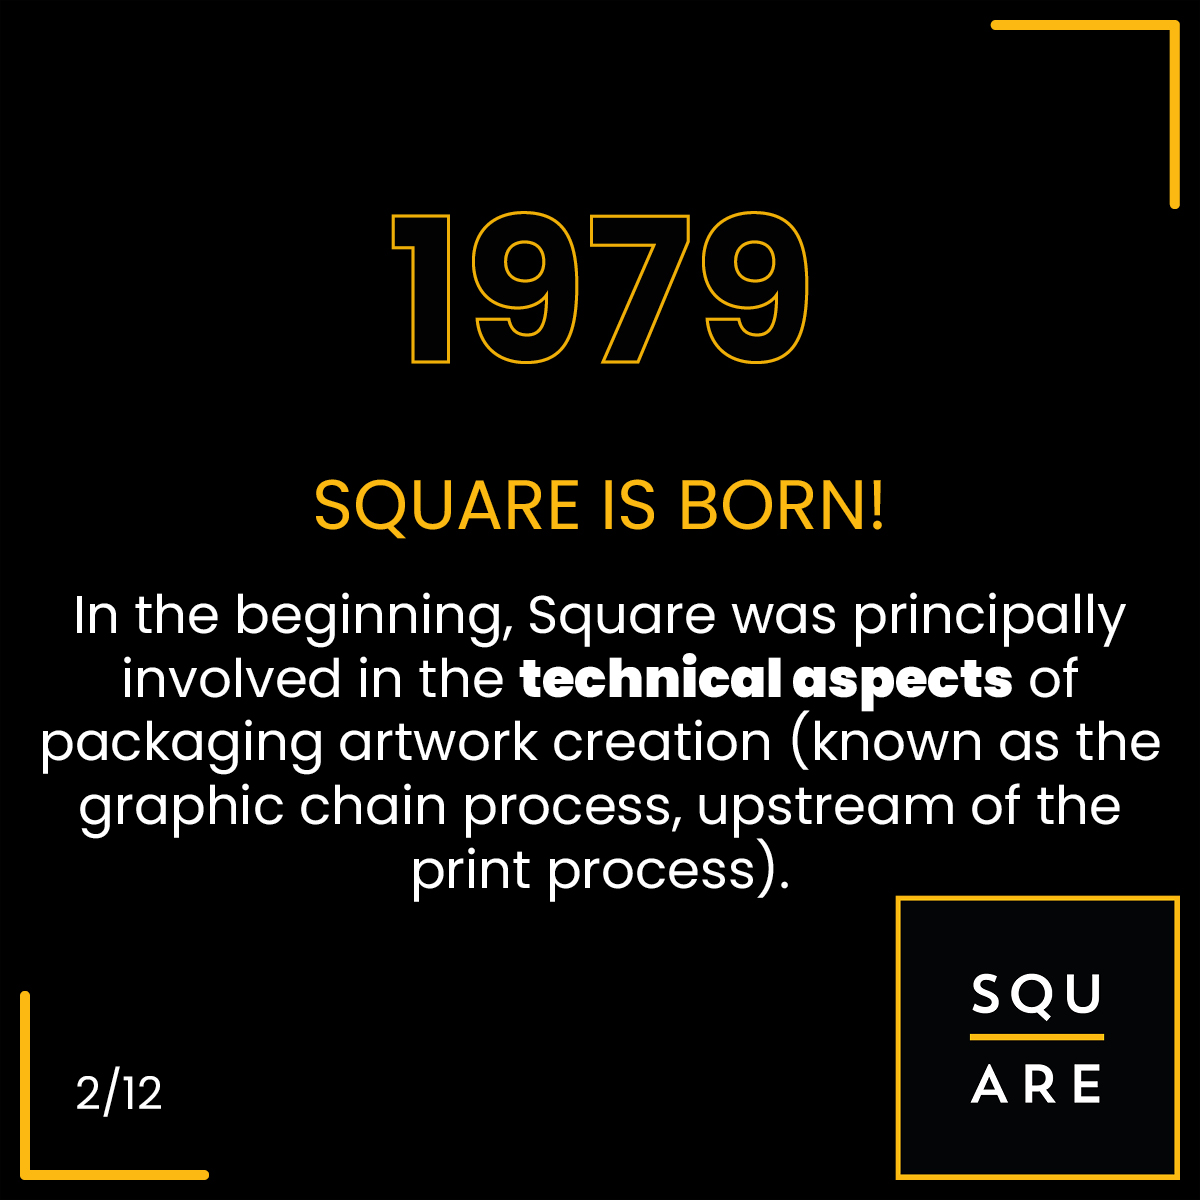 1979, Square is born! In the beginning, Square was principally involved in the technical aspects of packaging artwork creation (known as the graphic chain process, upstream of the print process).